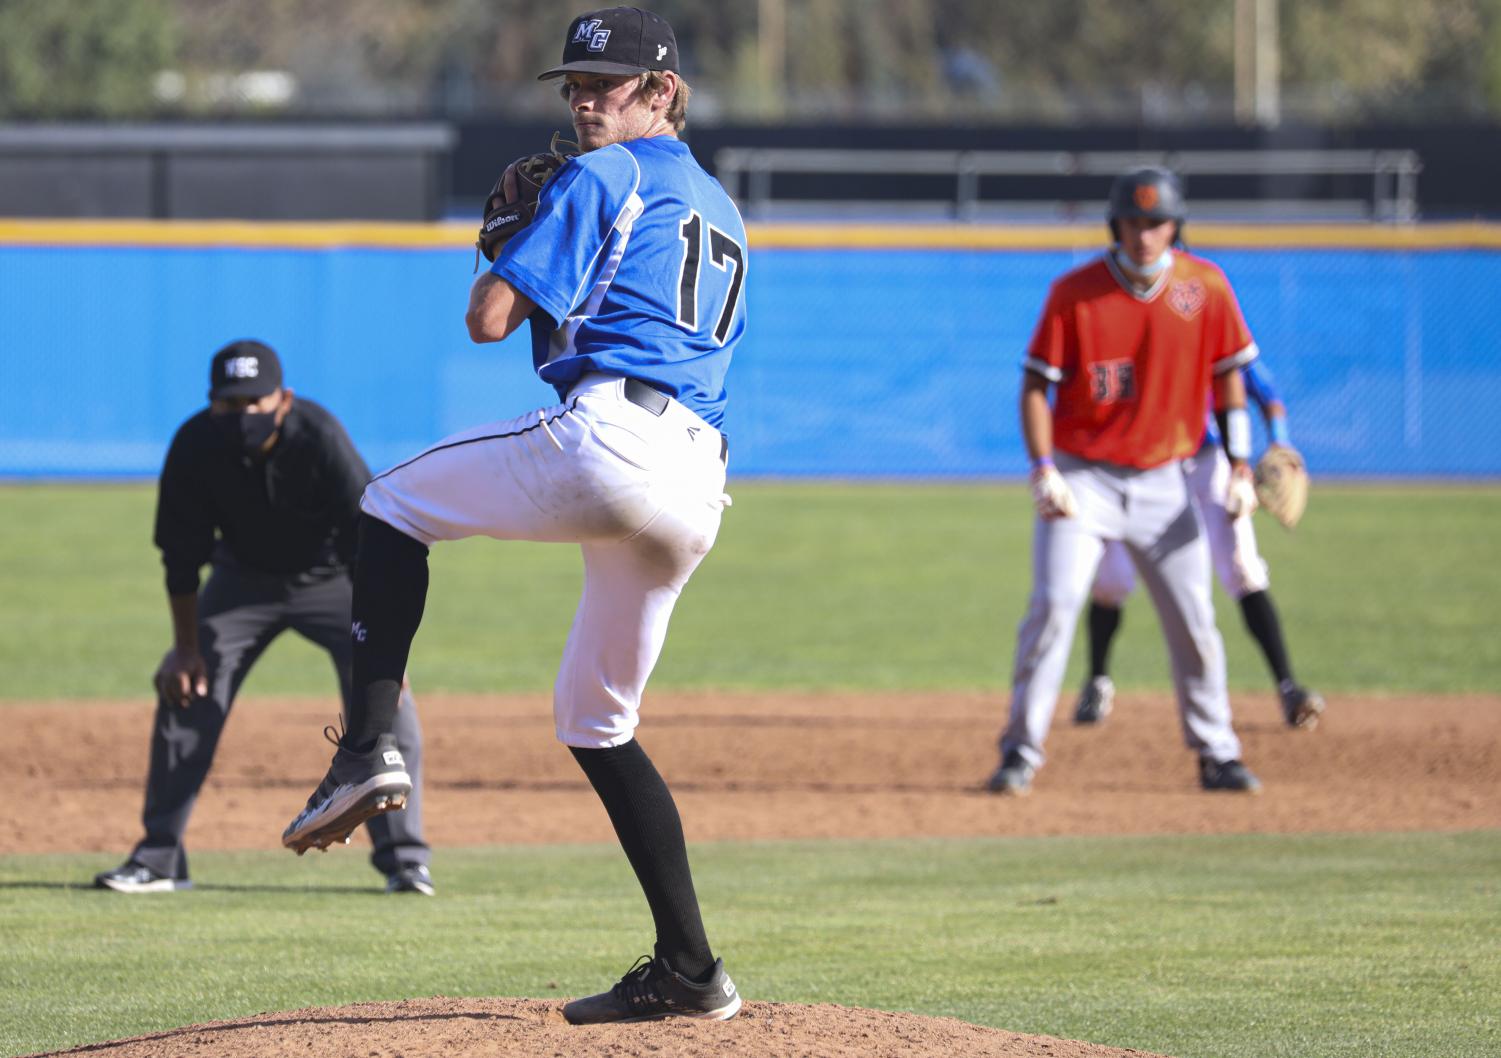 Moorpark pitcher Cole Kennedy prepares to throw a pitch during the doubleheader game against Ventura College on Thursday, April 15, 2021 at Moorpark College.